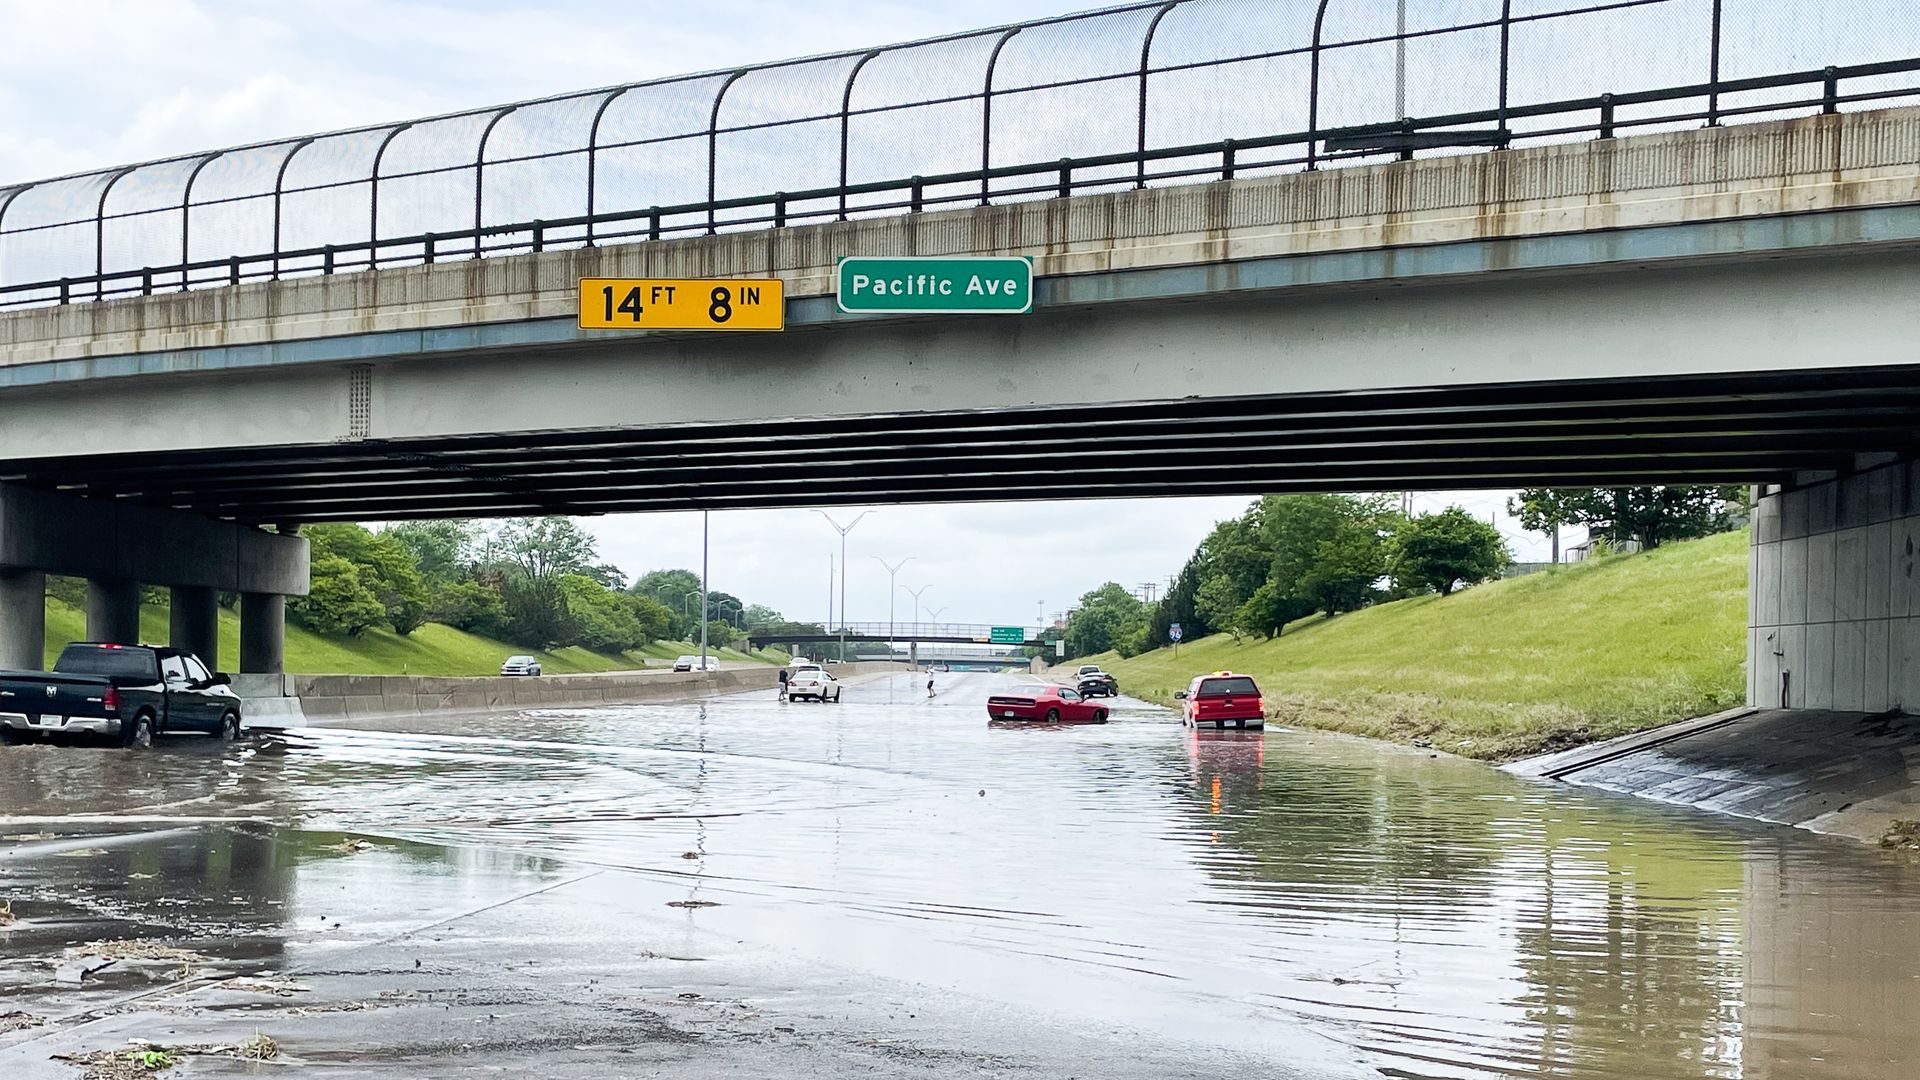 Cars abandoned at this I-96 overpass of Pacific Ave. causing the freeway to become impassible where the water was over 2 feet due to the rains in Northwest Detroit on Saturday June 26 in Detroit